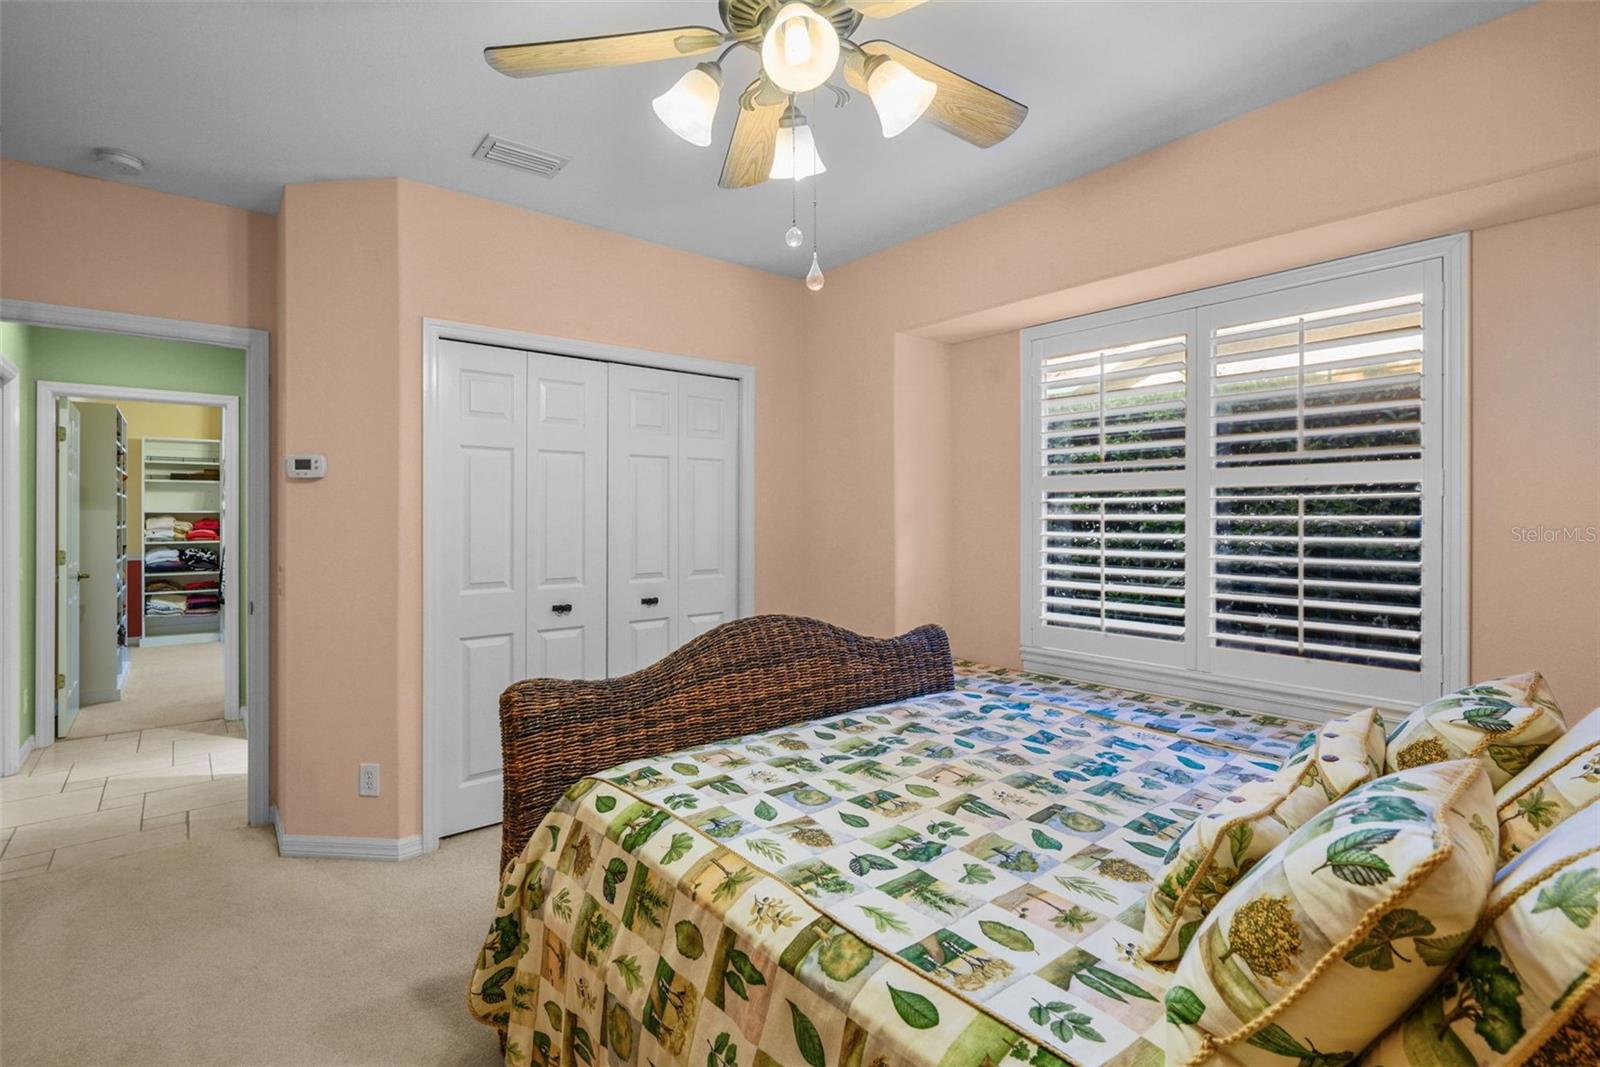 Bedroom 3 with built in window seat and plantation shutters